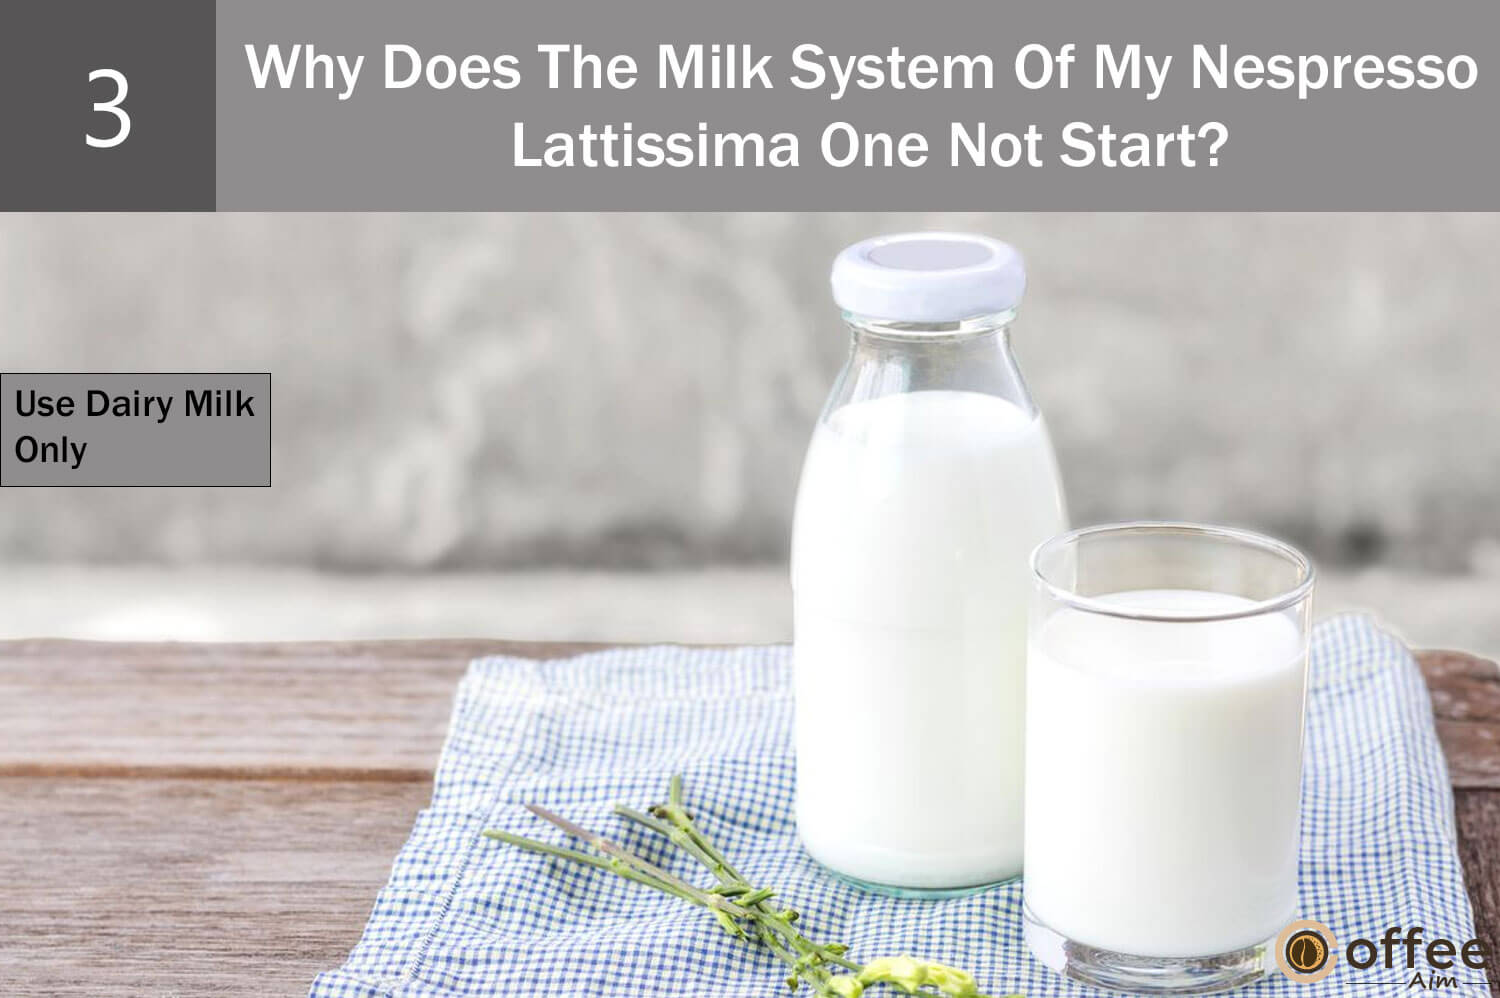 Use dairy milk instead of vegetable milk in the milk system to resolve the issue. The system is designed to work effectively with the proper kind of milk.